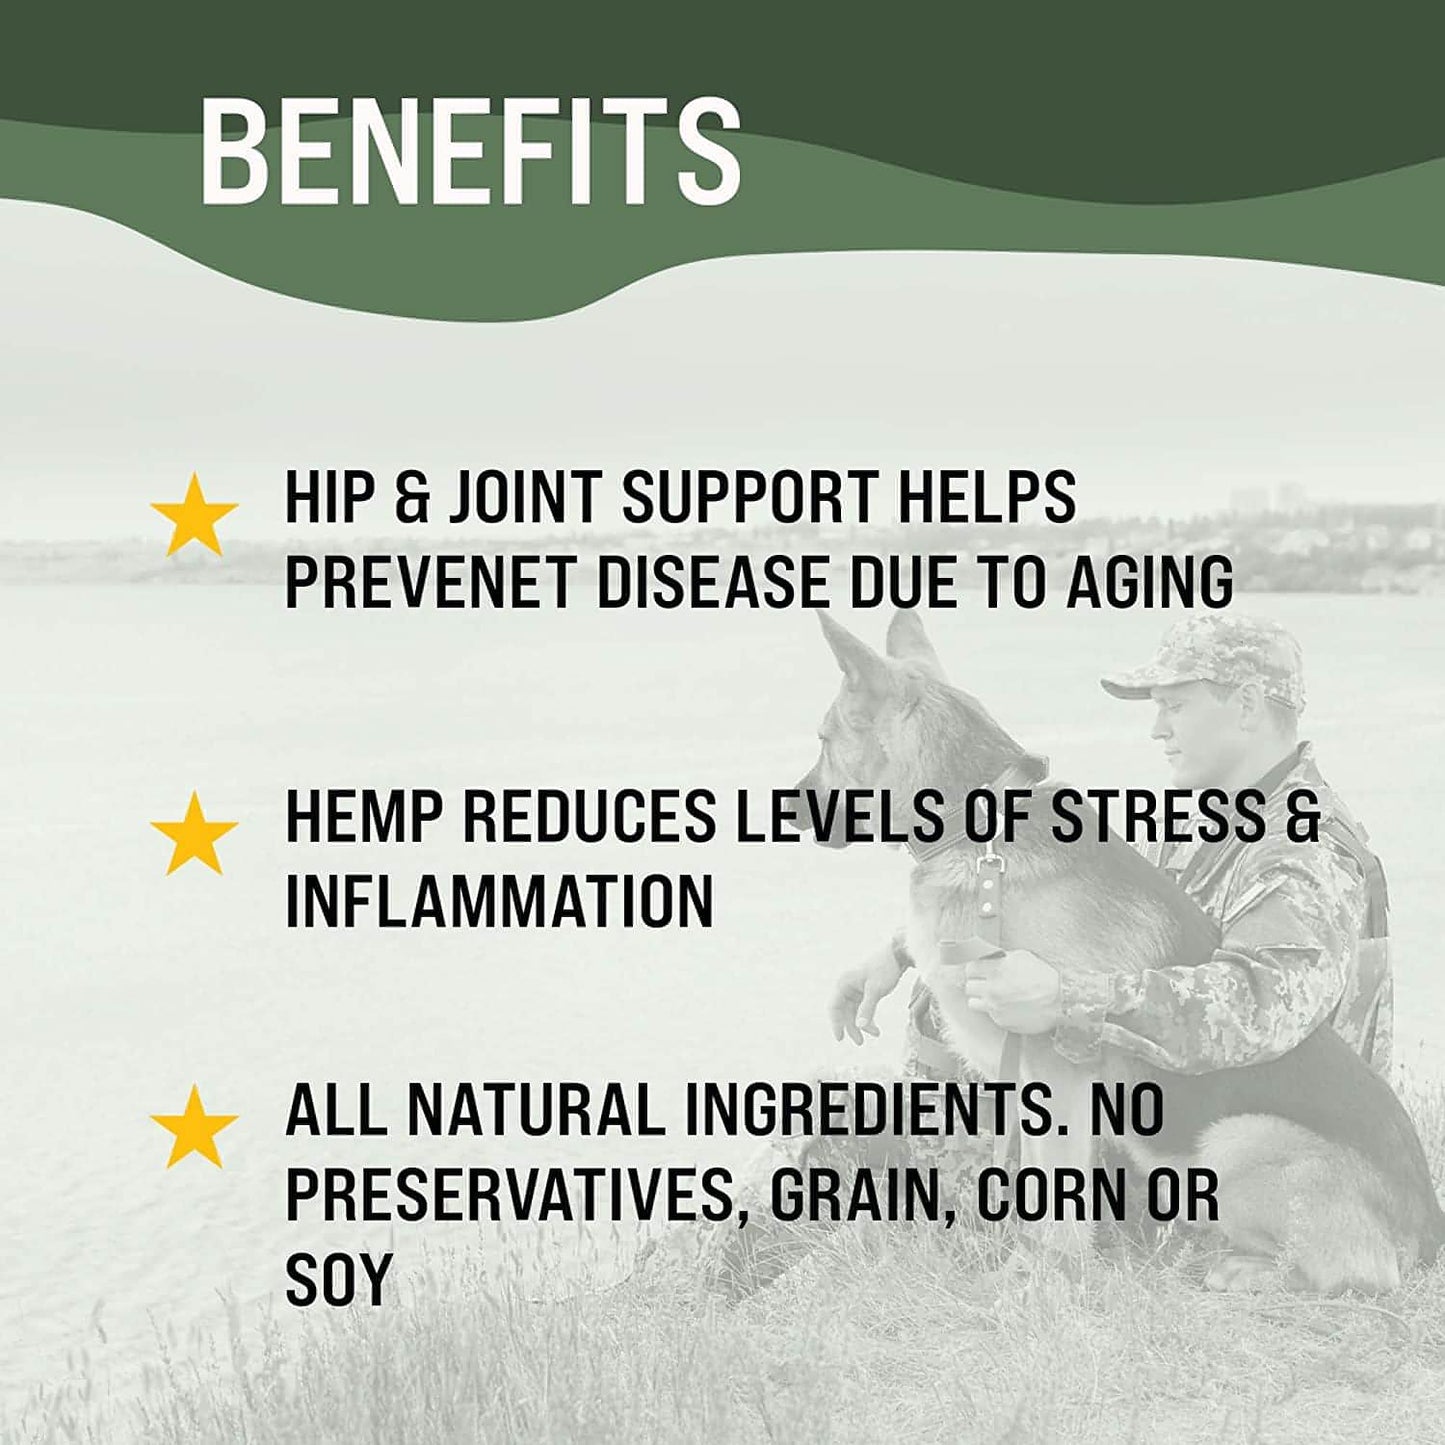 VetraFlex Joint Complete Hip & Joint Support with Hemp, Glucosamine, Chondroitin & MSM – for Dogs